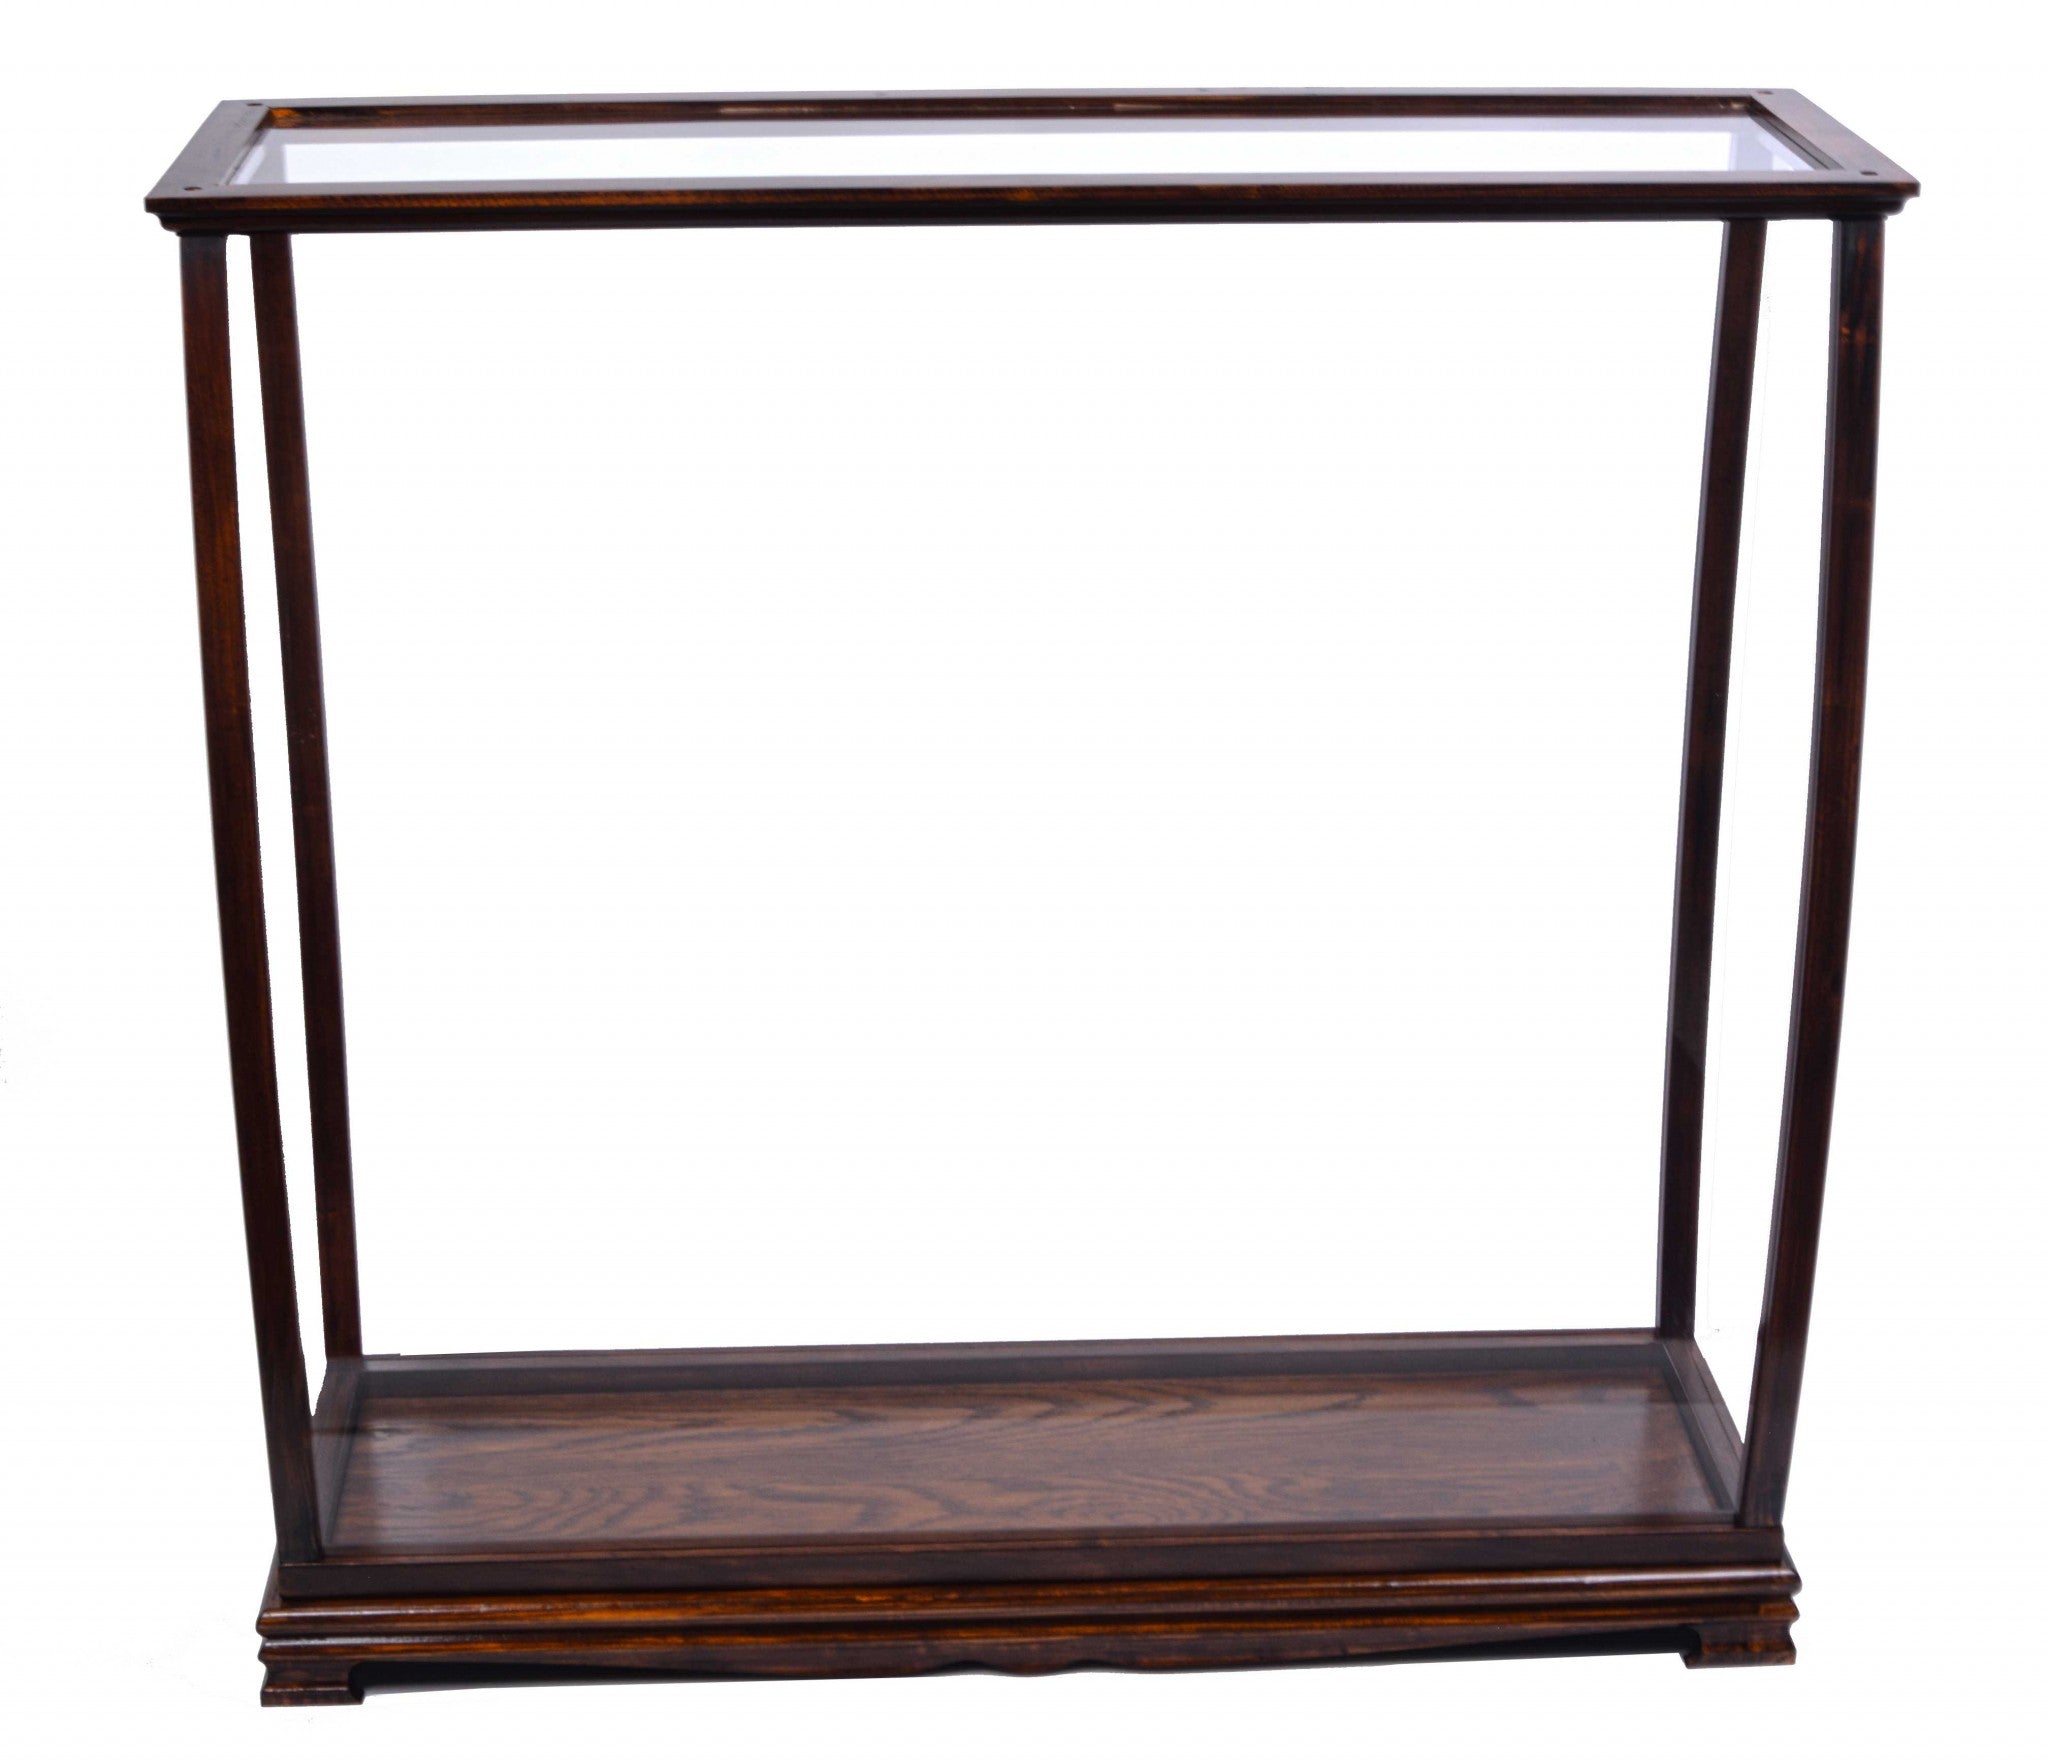 13.75" x 40" x 39.25" BrownTable Top Display Case Classic